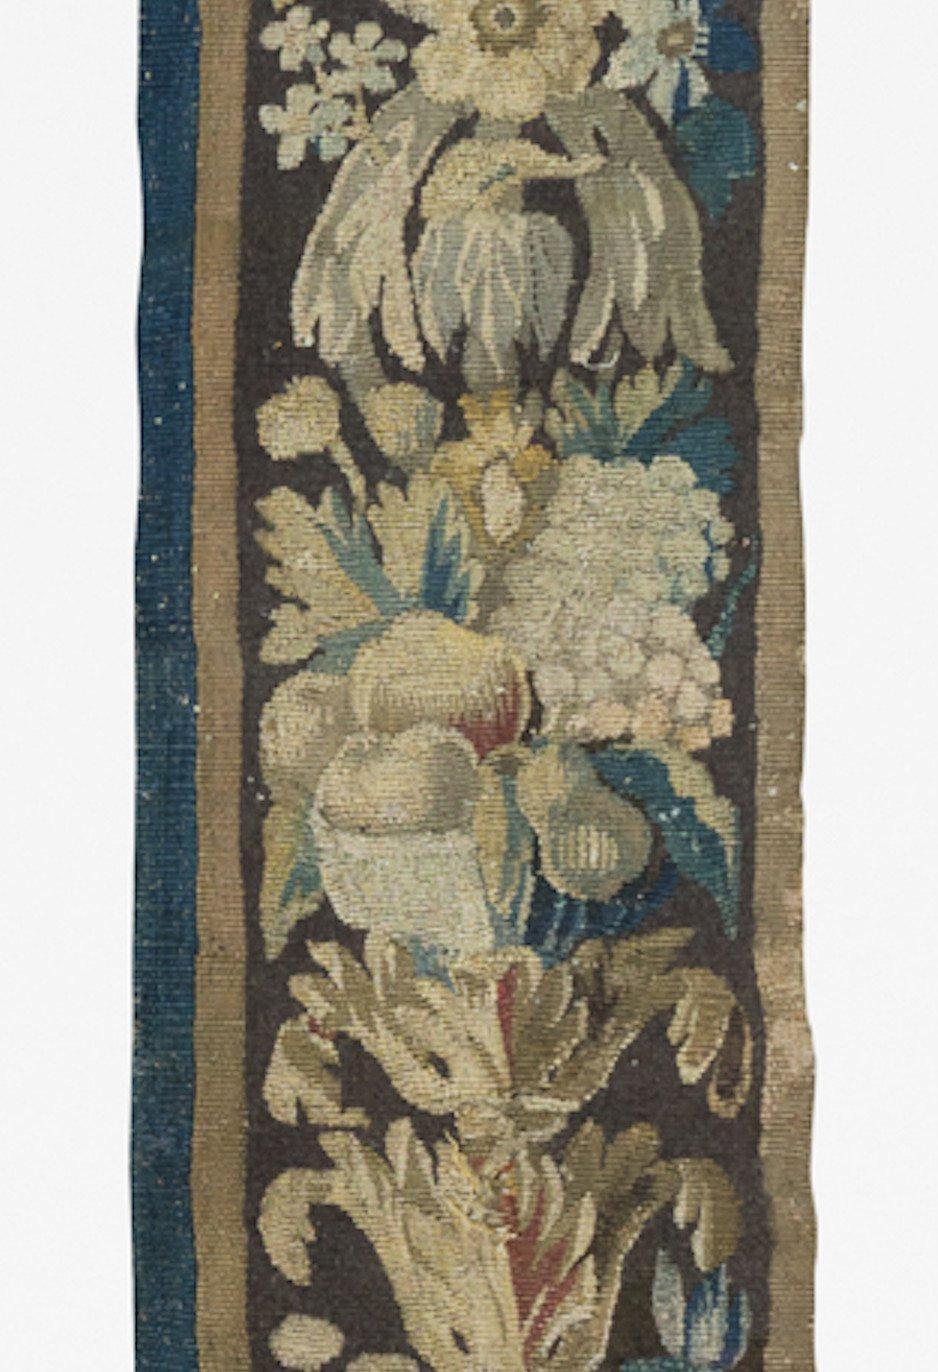 Lovely antique 17th century floral French Aubusson tapestry border panel in excellent condition measuring: 1 x 7.8 ft.

  





  